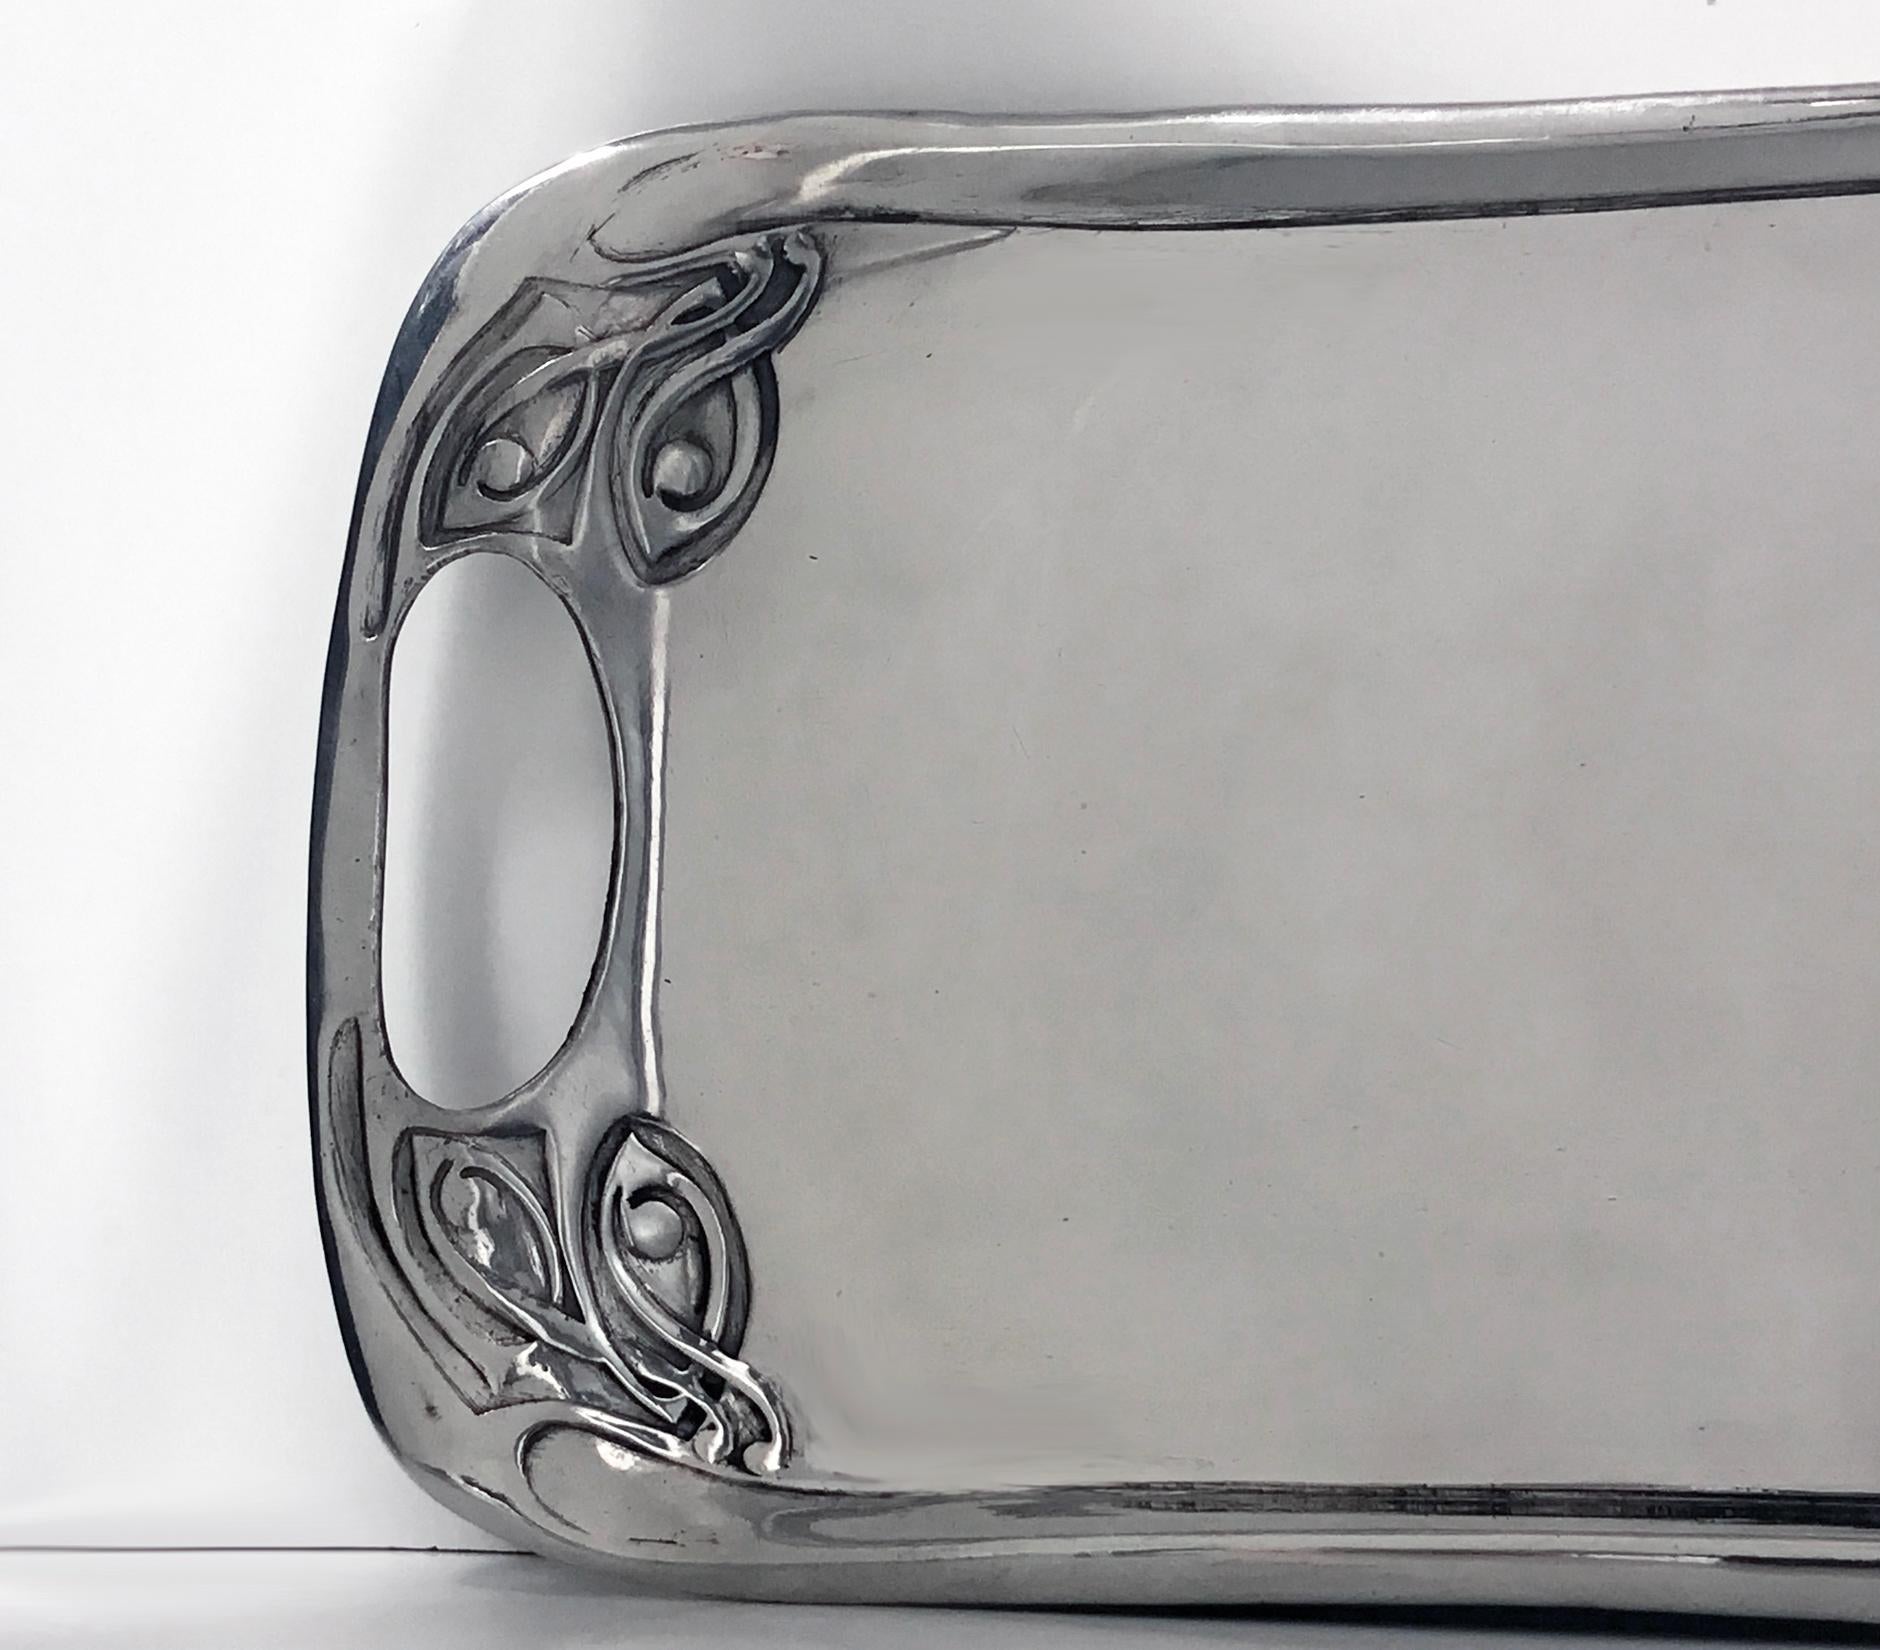 Liberty & Co polished pewter tray, designed by Archibald Knox, 1902-1905 design number 0309. Measures: 12.25 x 6.25 inches. The tray centre plain with open kidney handles and cornices of intertwining Celtic knot decoration. Liberty Trudric marks